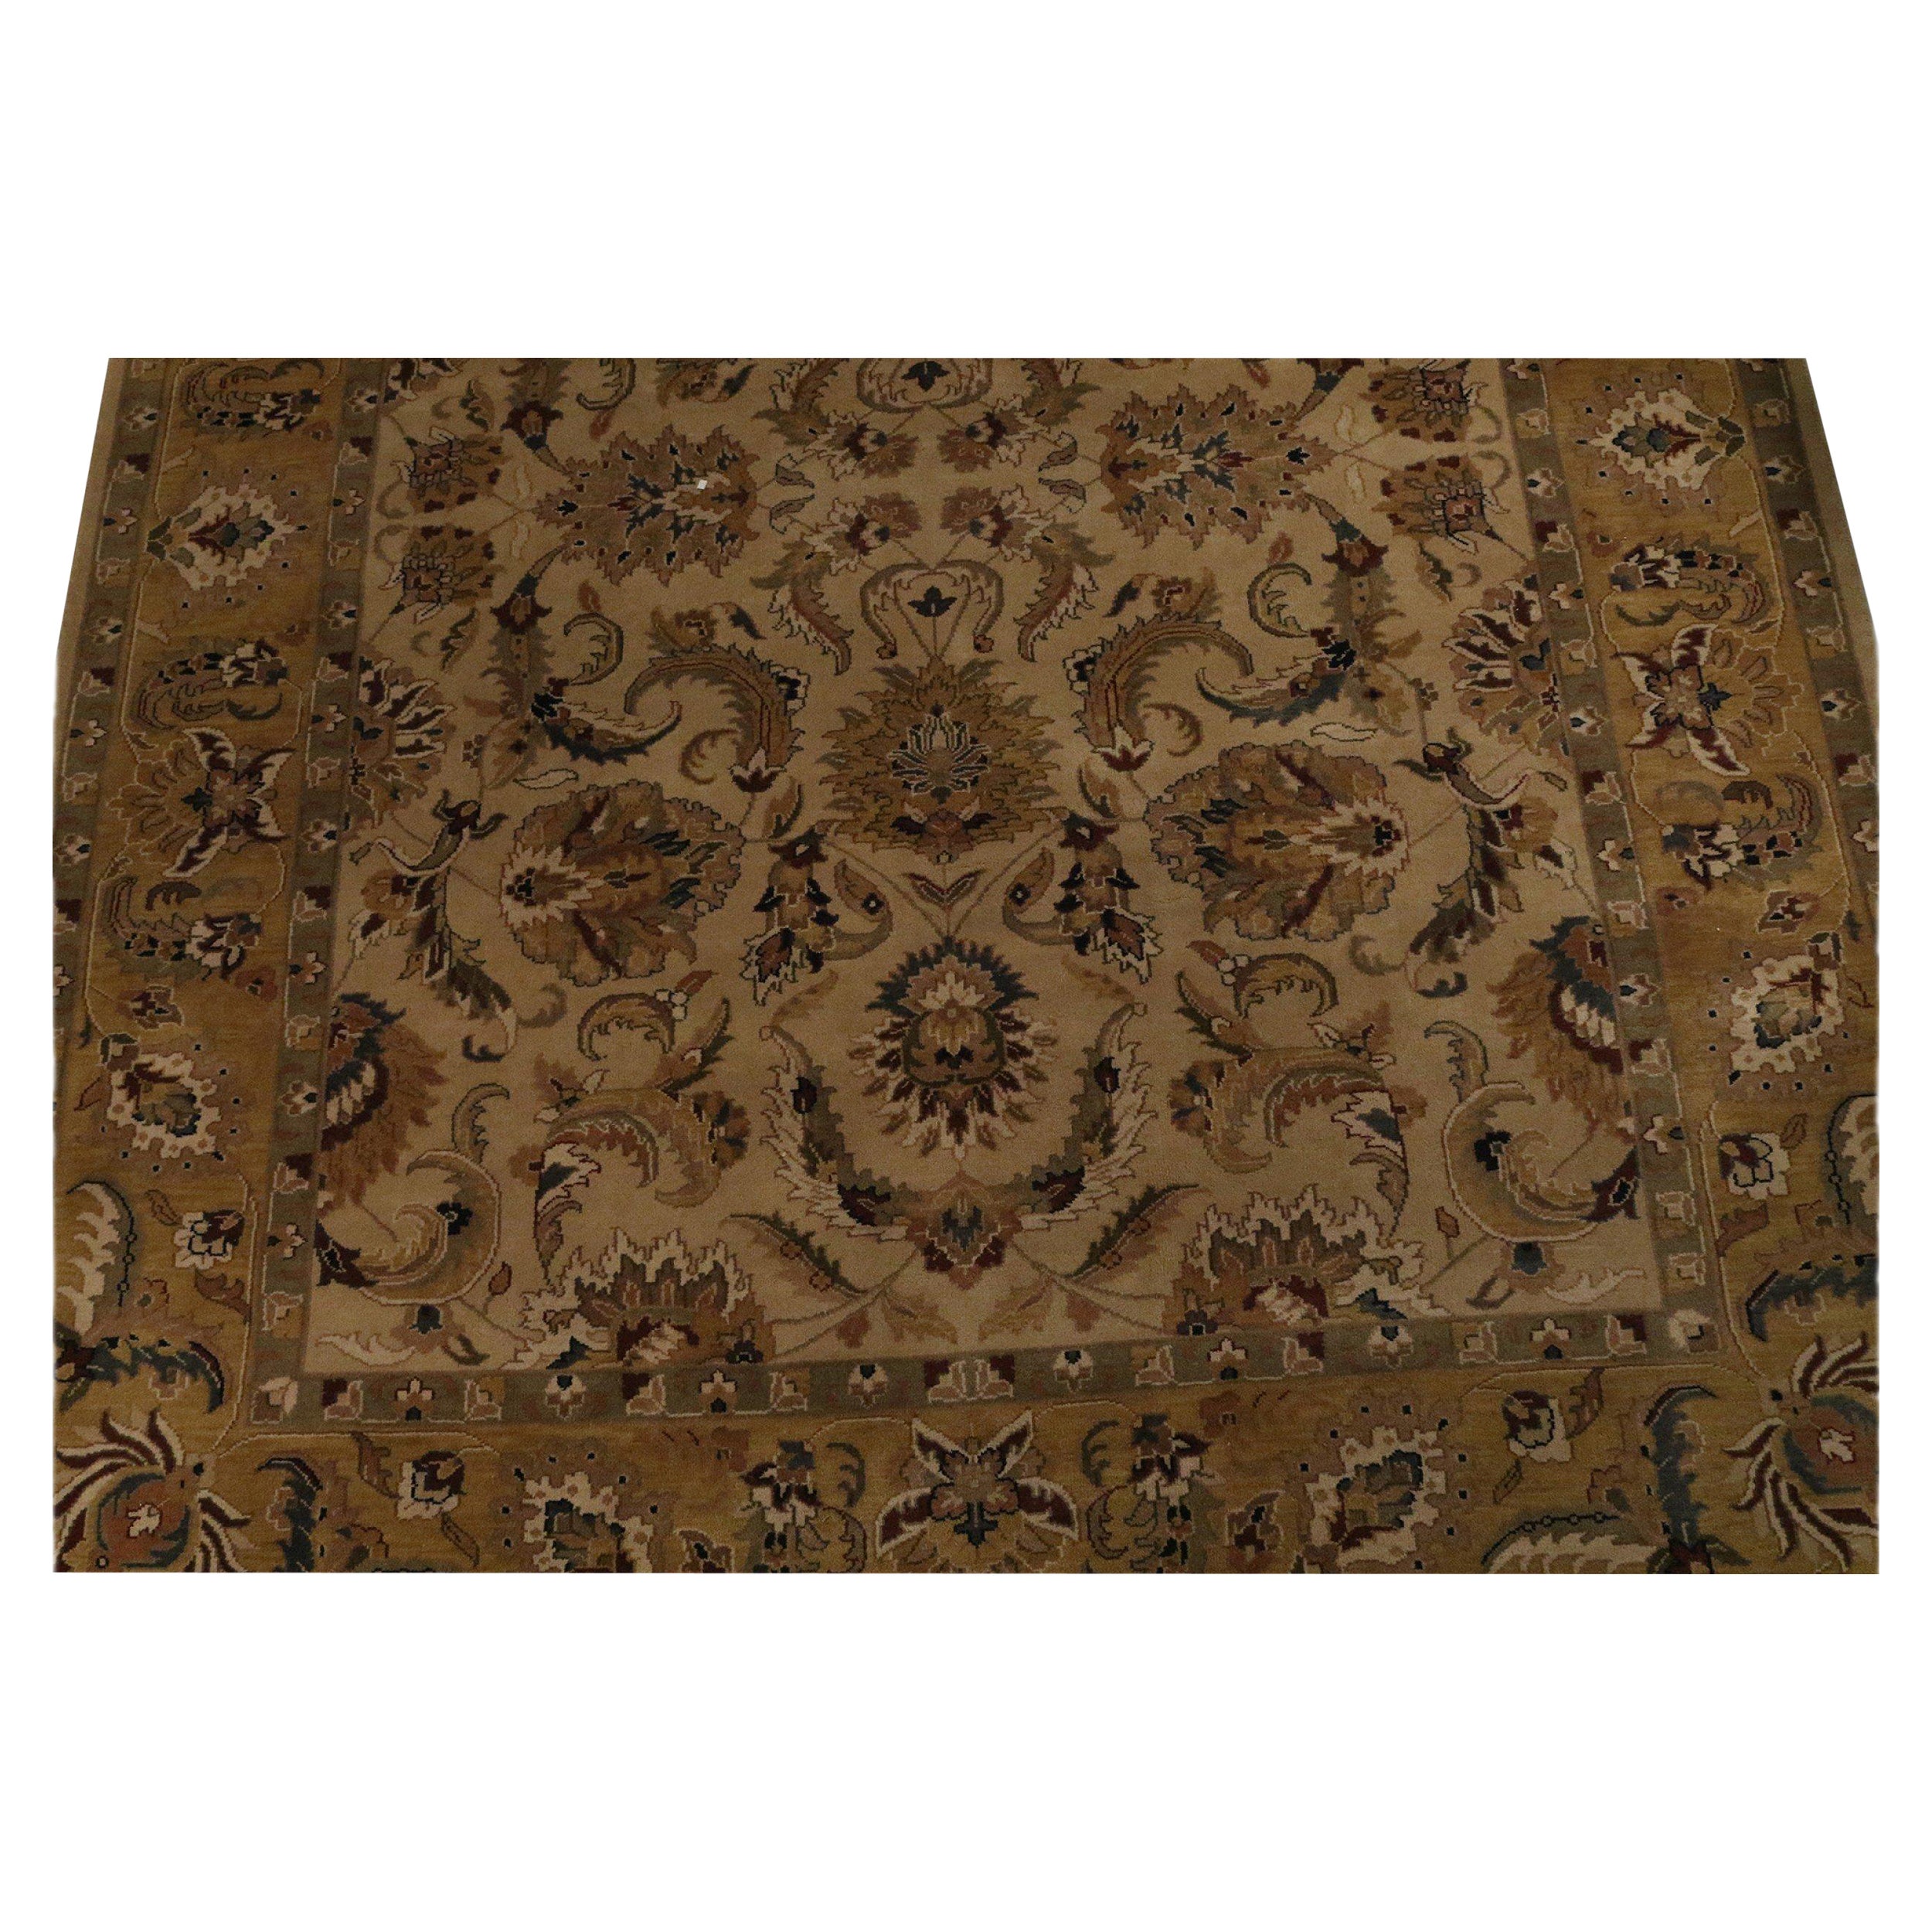 Middle Eastern Turkish Gold and Brown Patterned Area Rug